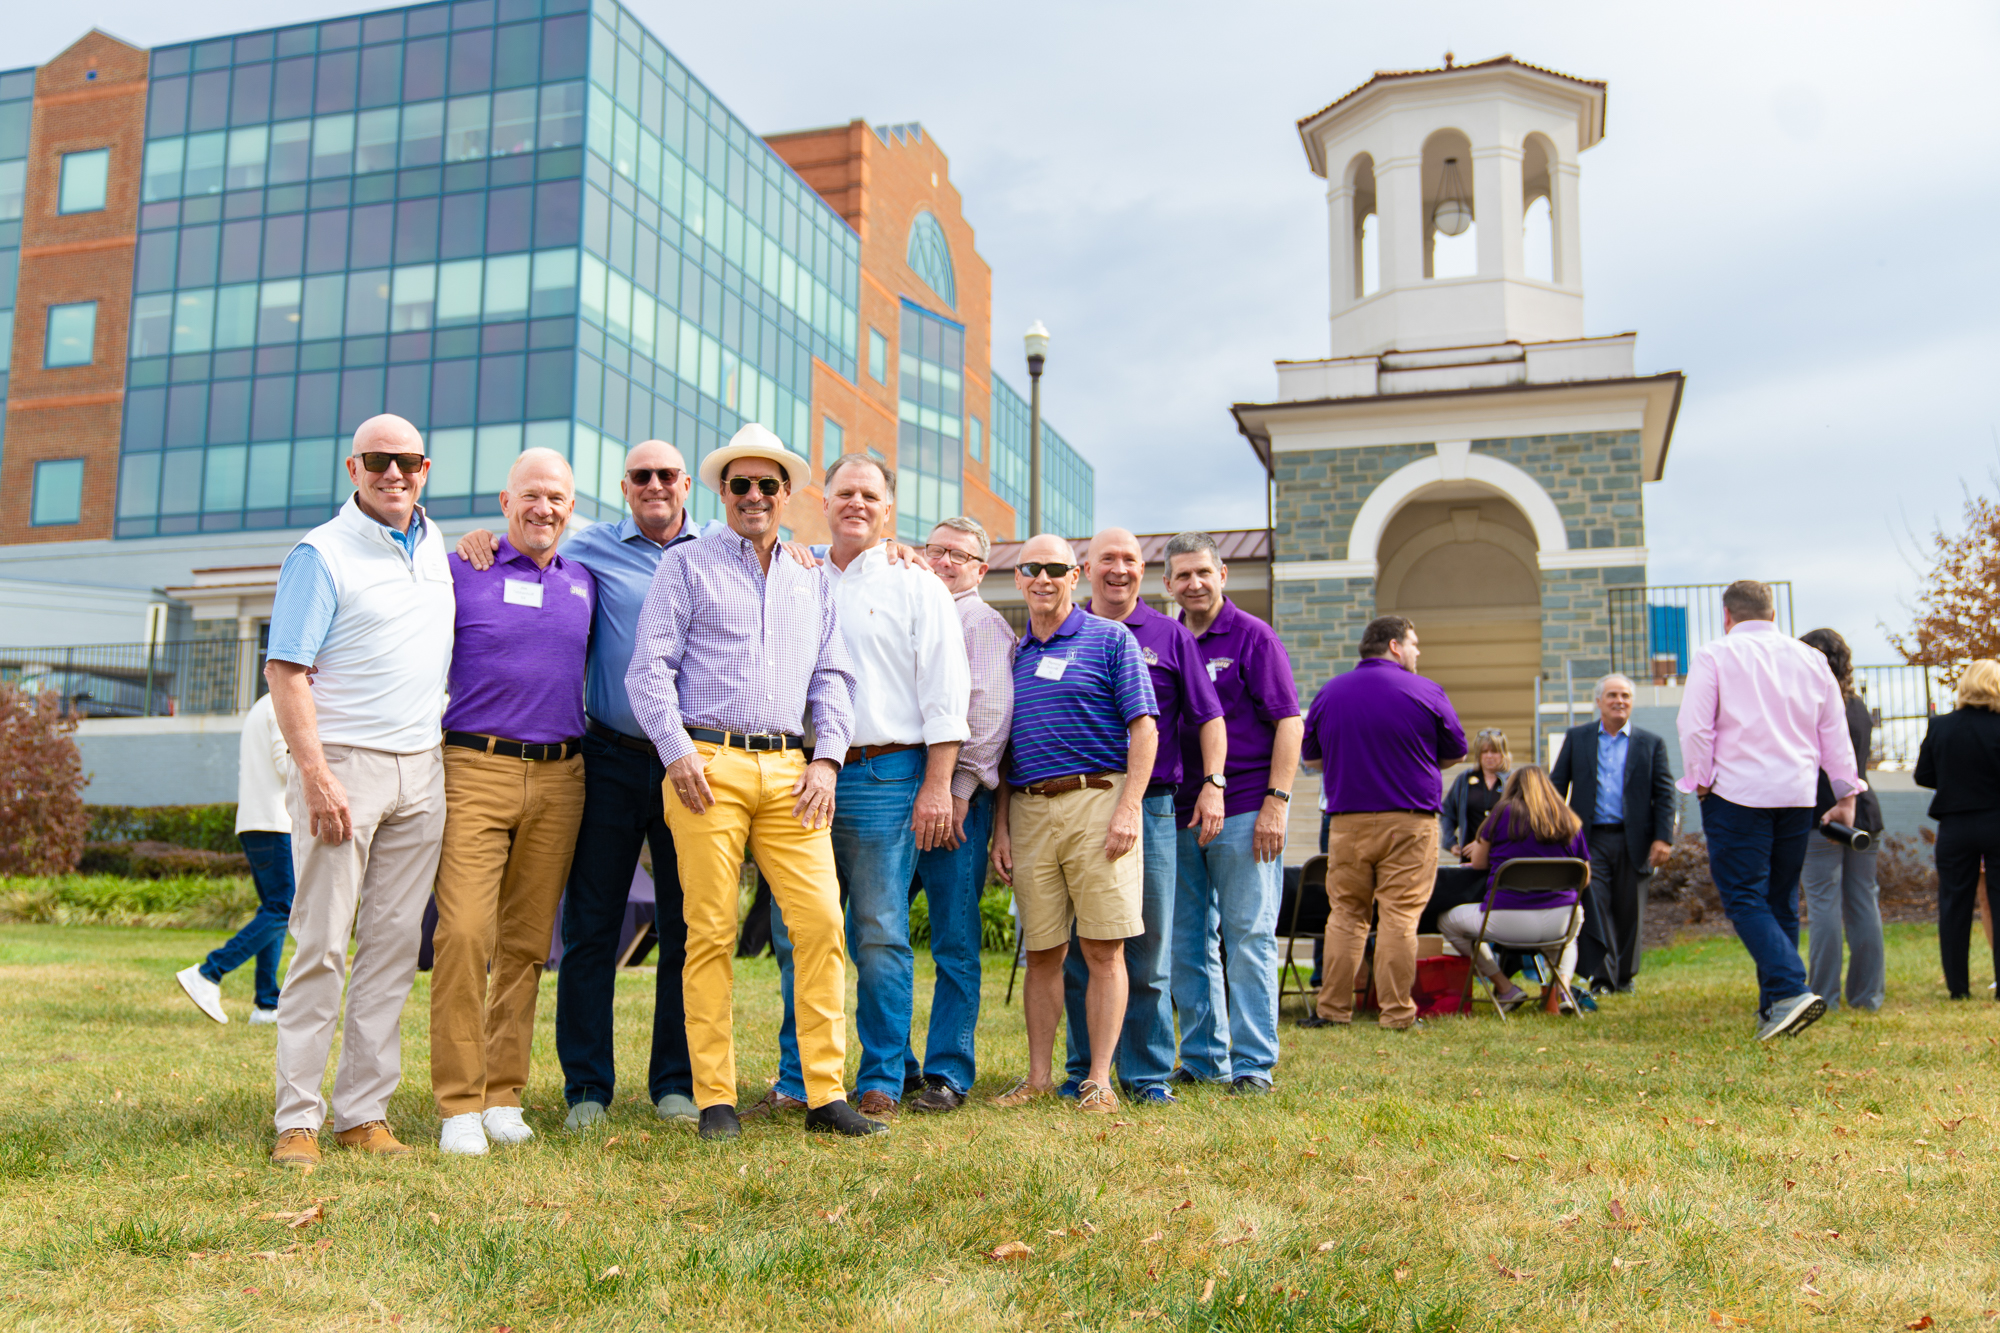 Paul Holland in a group of his Sigma Nu fraternity brothers outside Holland Yates Hall